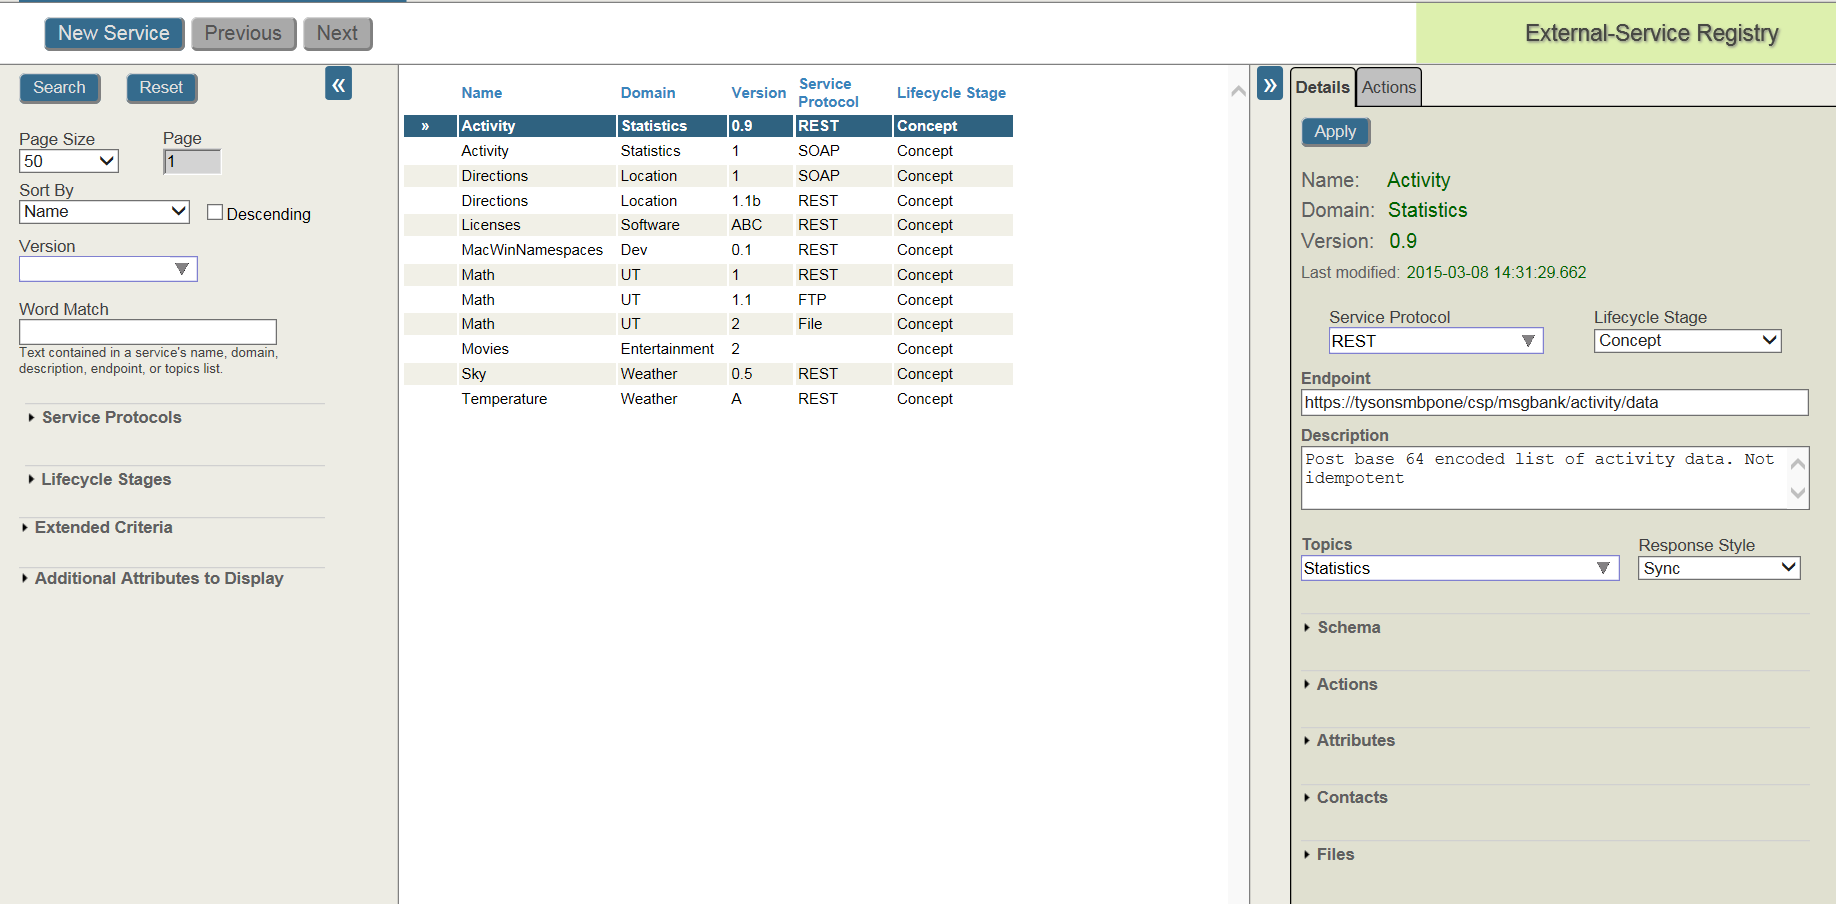 External Service Registry page in the InterSystems IRIS Management Portal